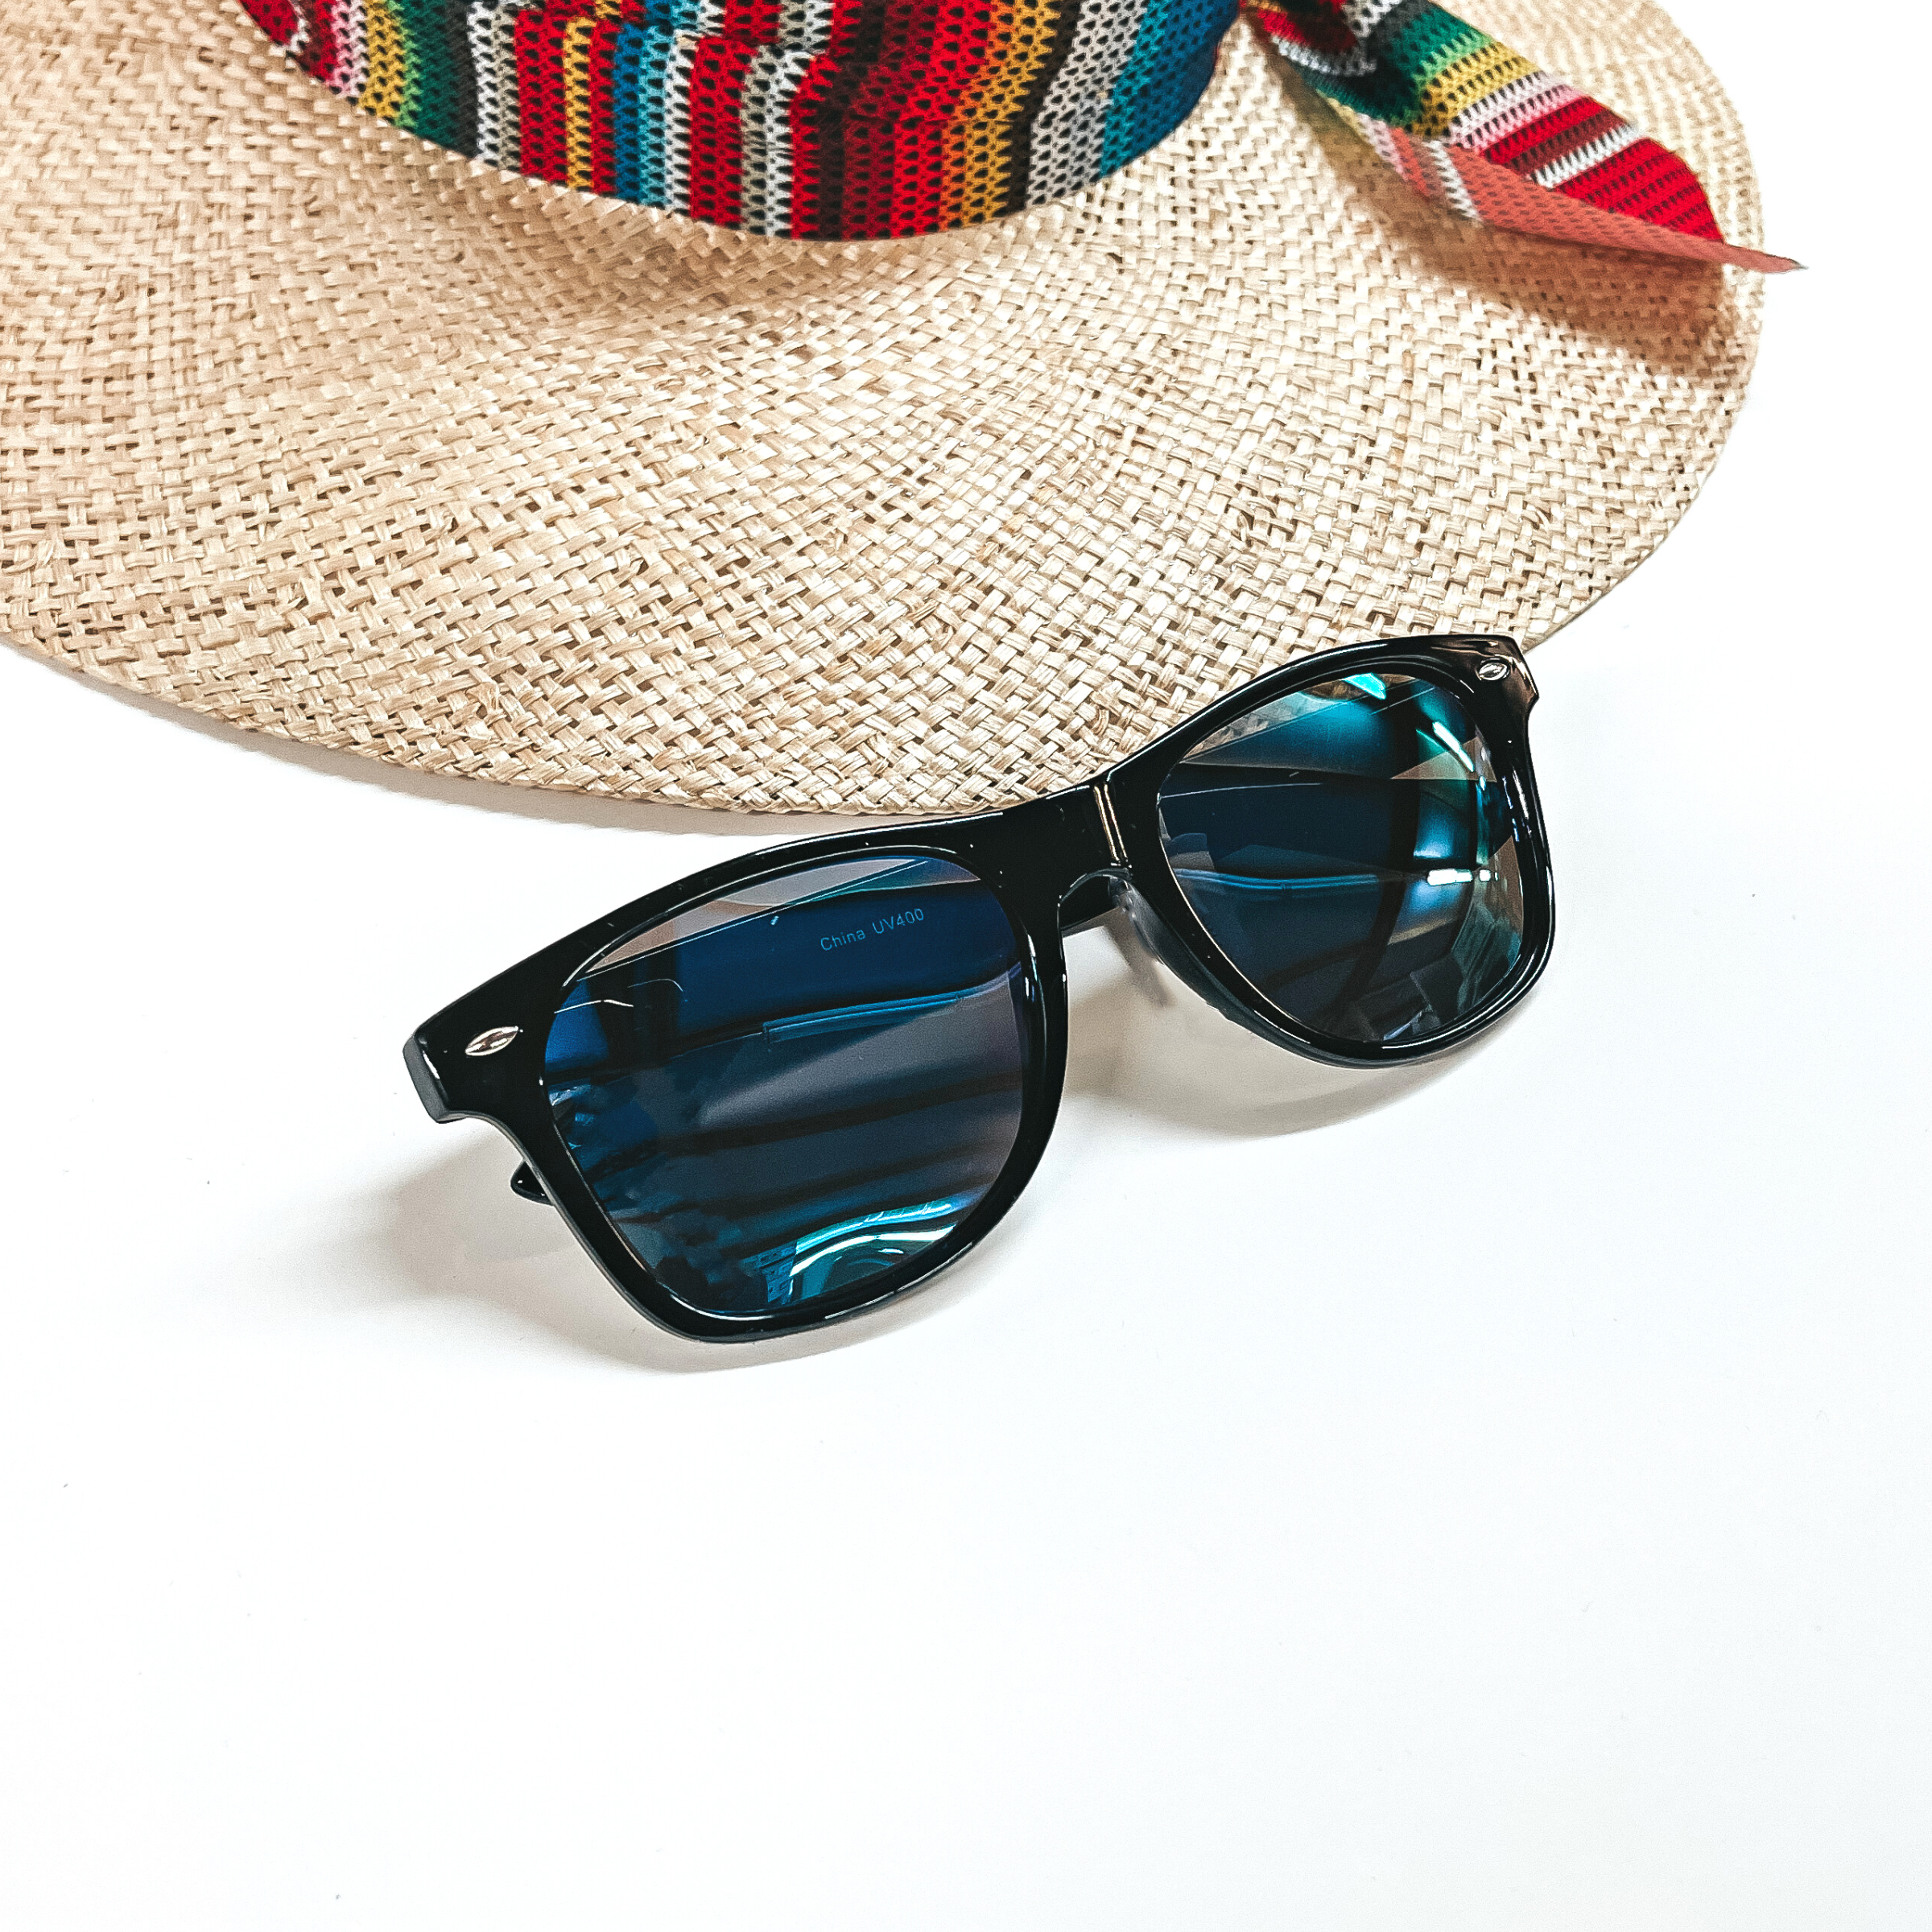 These are black framed sunglasses with dark blue lenses and silver detailing. These sunglasses are placed on a white background with a straw hat in the back as decor.